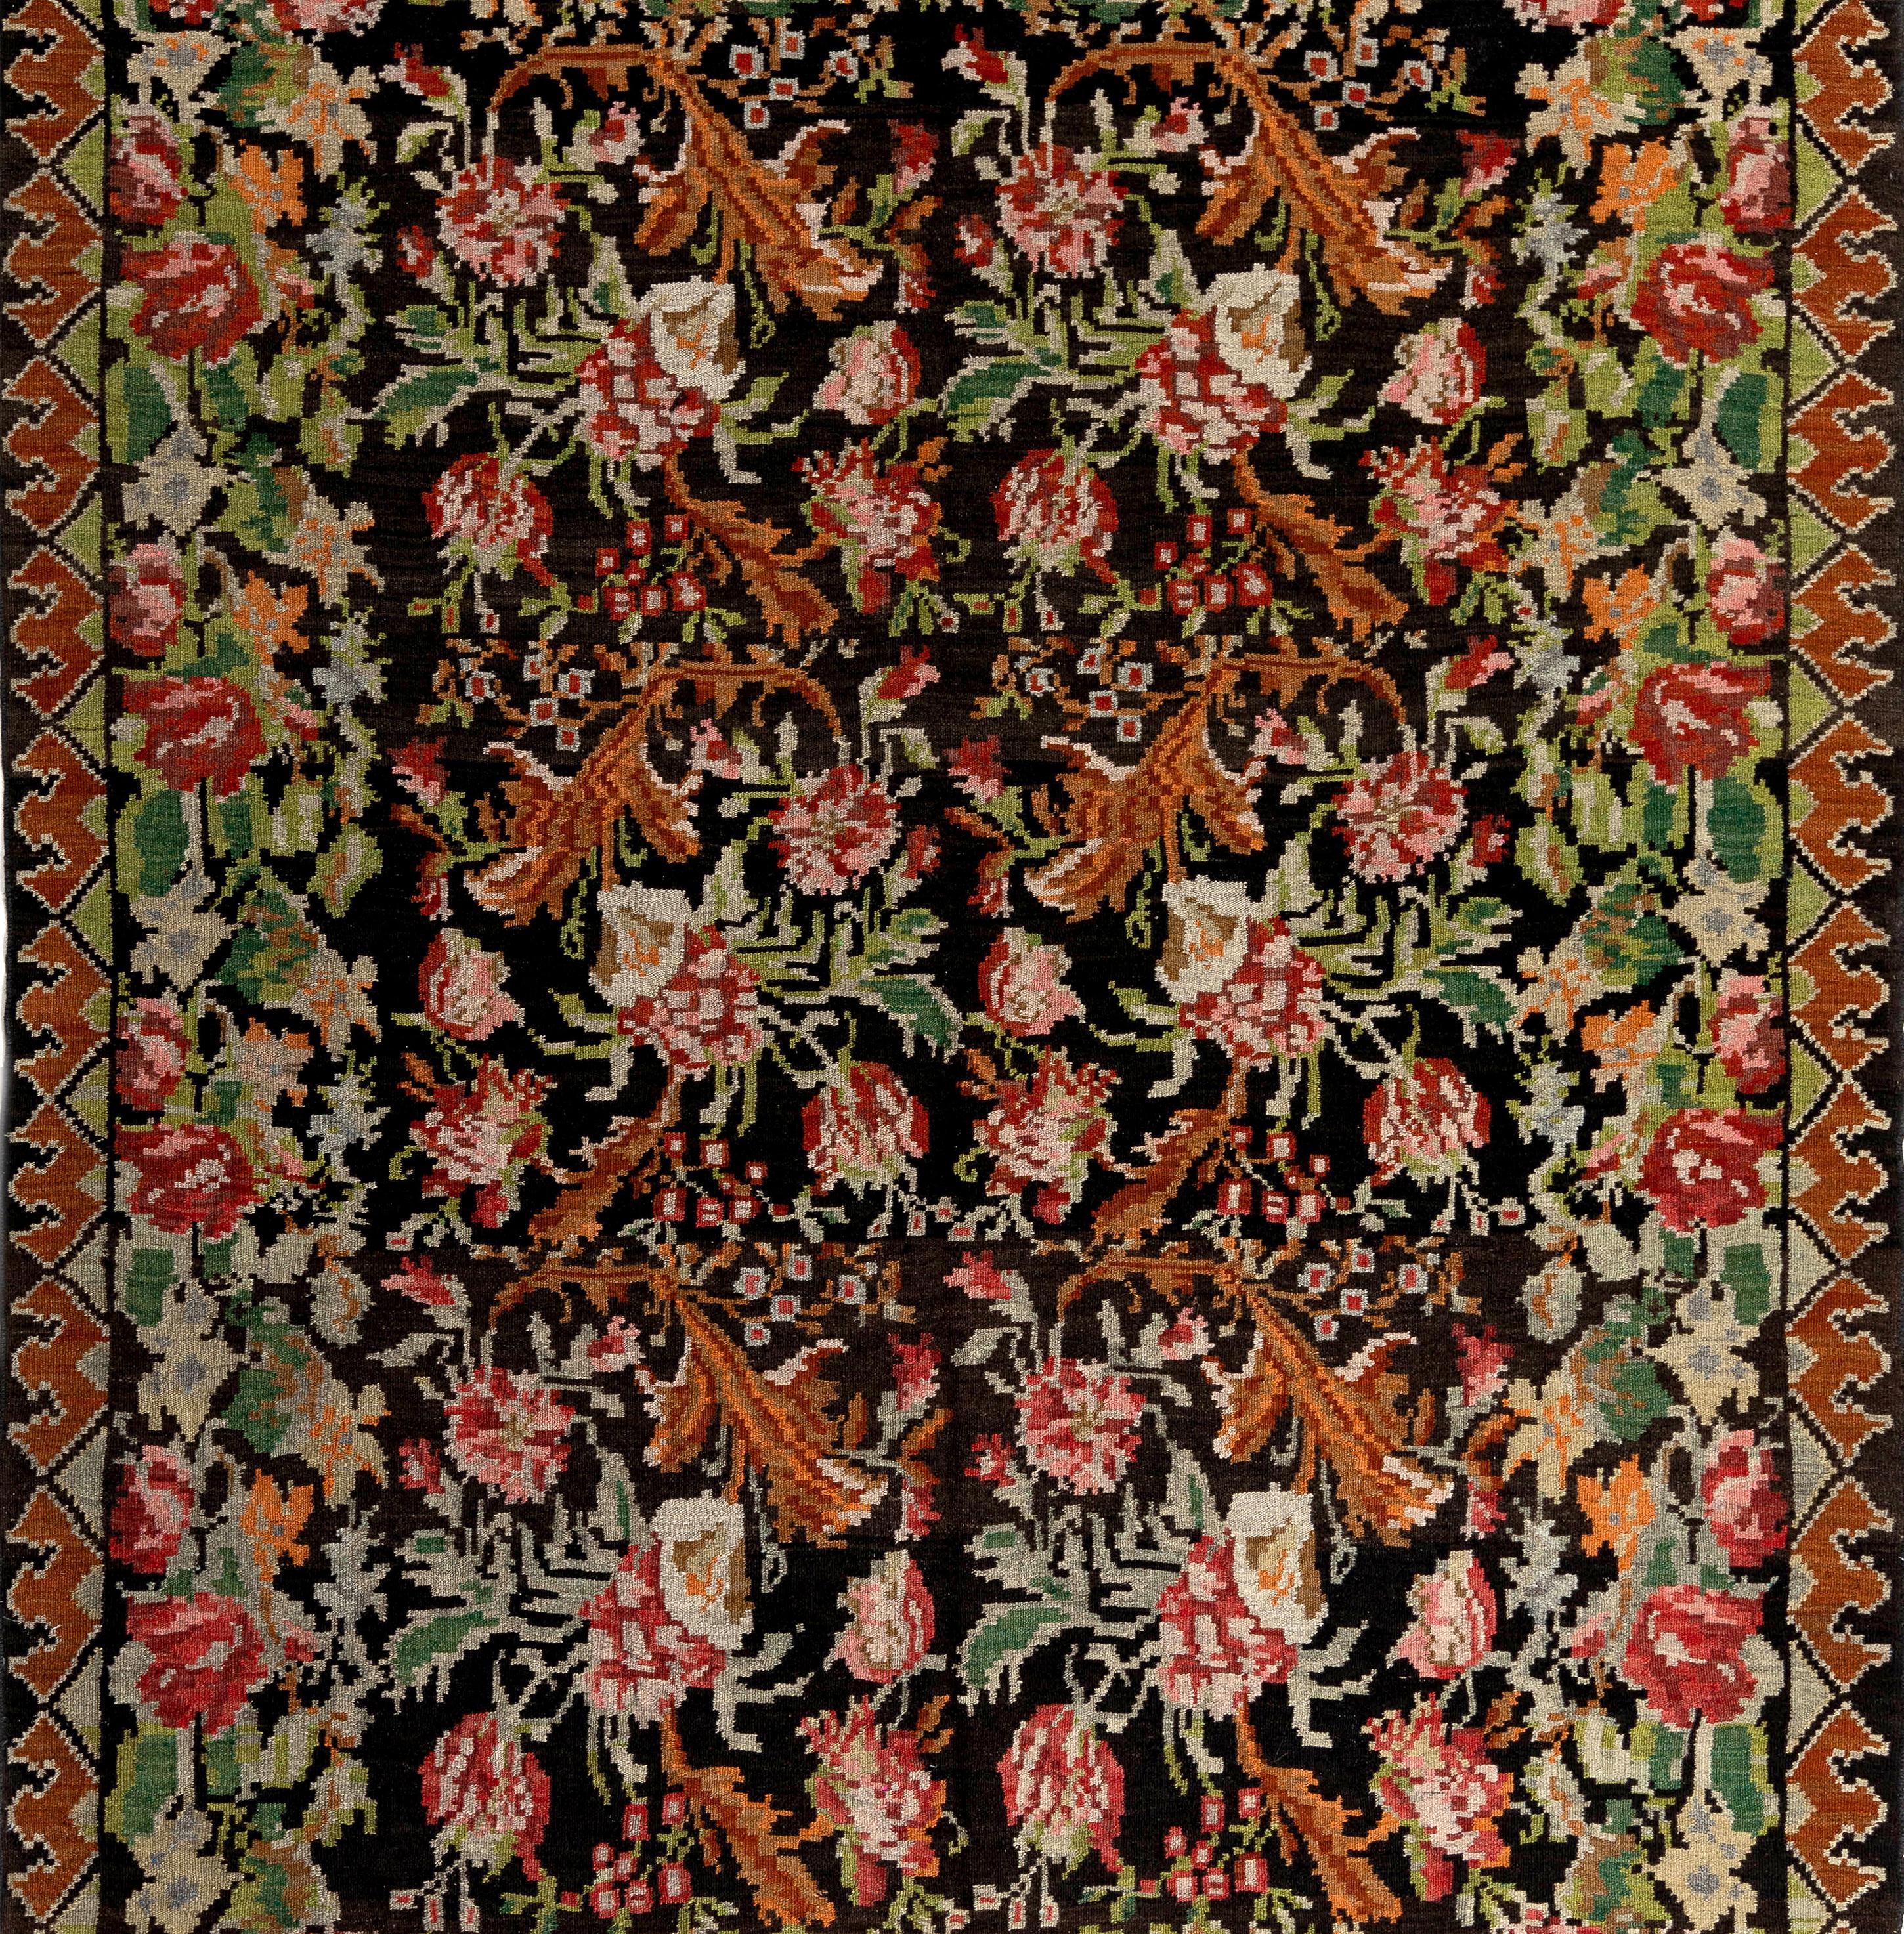 One of a kind vintage Bessarabian Kilim.
A handwoven Eastern European rug from Moldova. These traditional Moldovan flat-weaves are inspired from vintage Aubusson carpets but they are distinguished with their black grounds, large floral patterns in